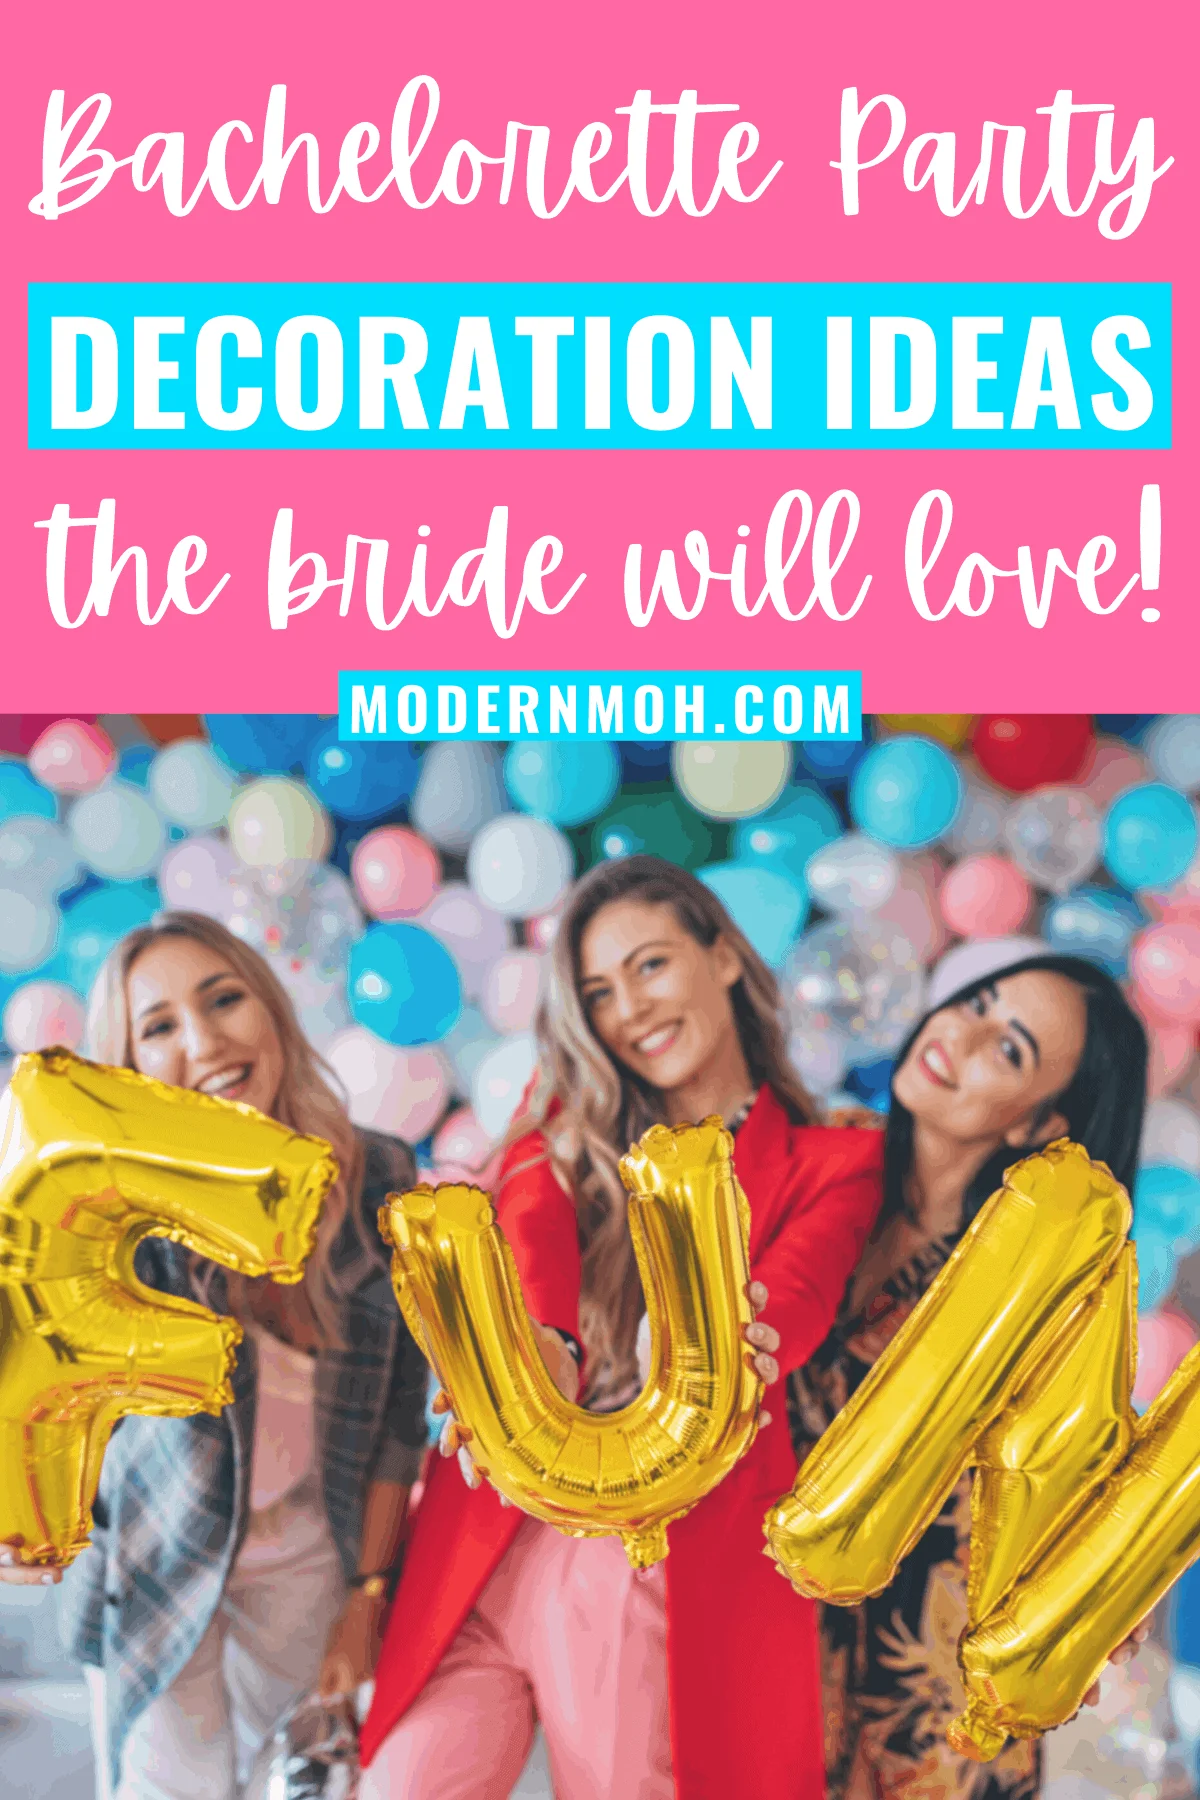 25 Bachelorette Party Decorations for a Photo-Worthy Weekend